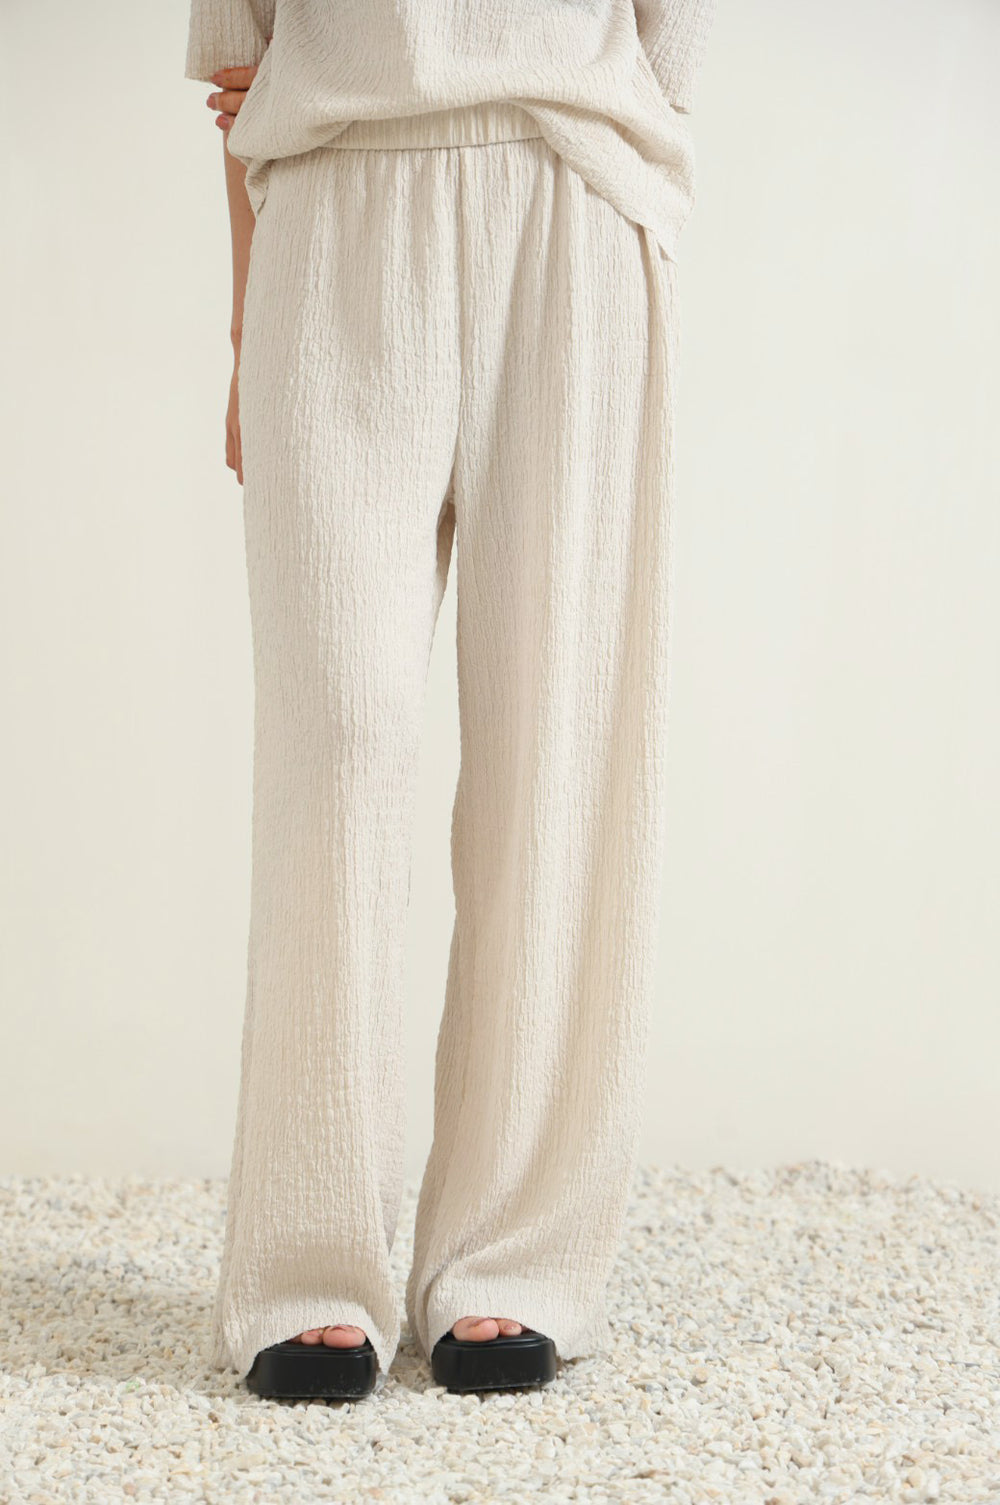 OFF WHITE TEXTURED STRETCHY PANTS